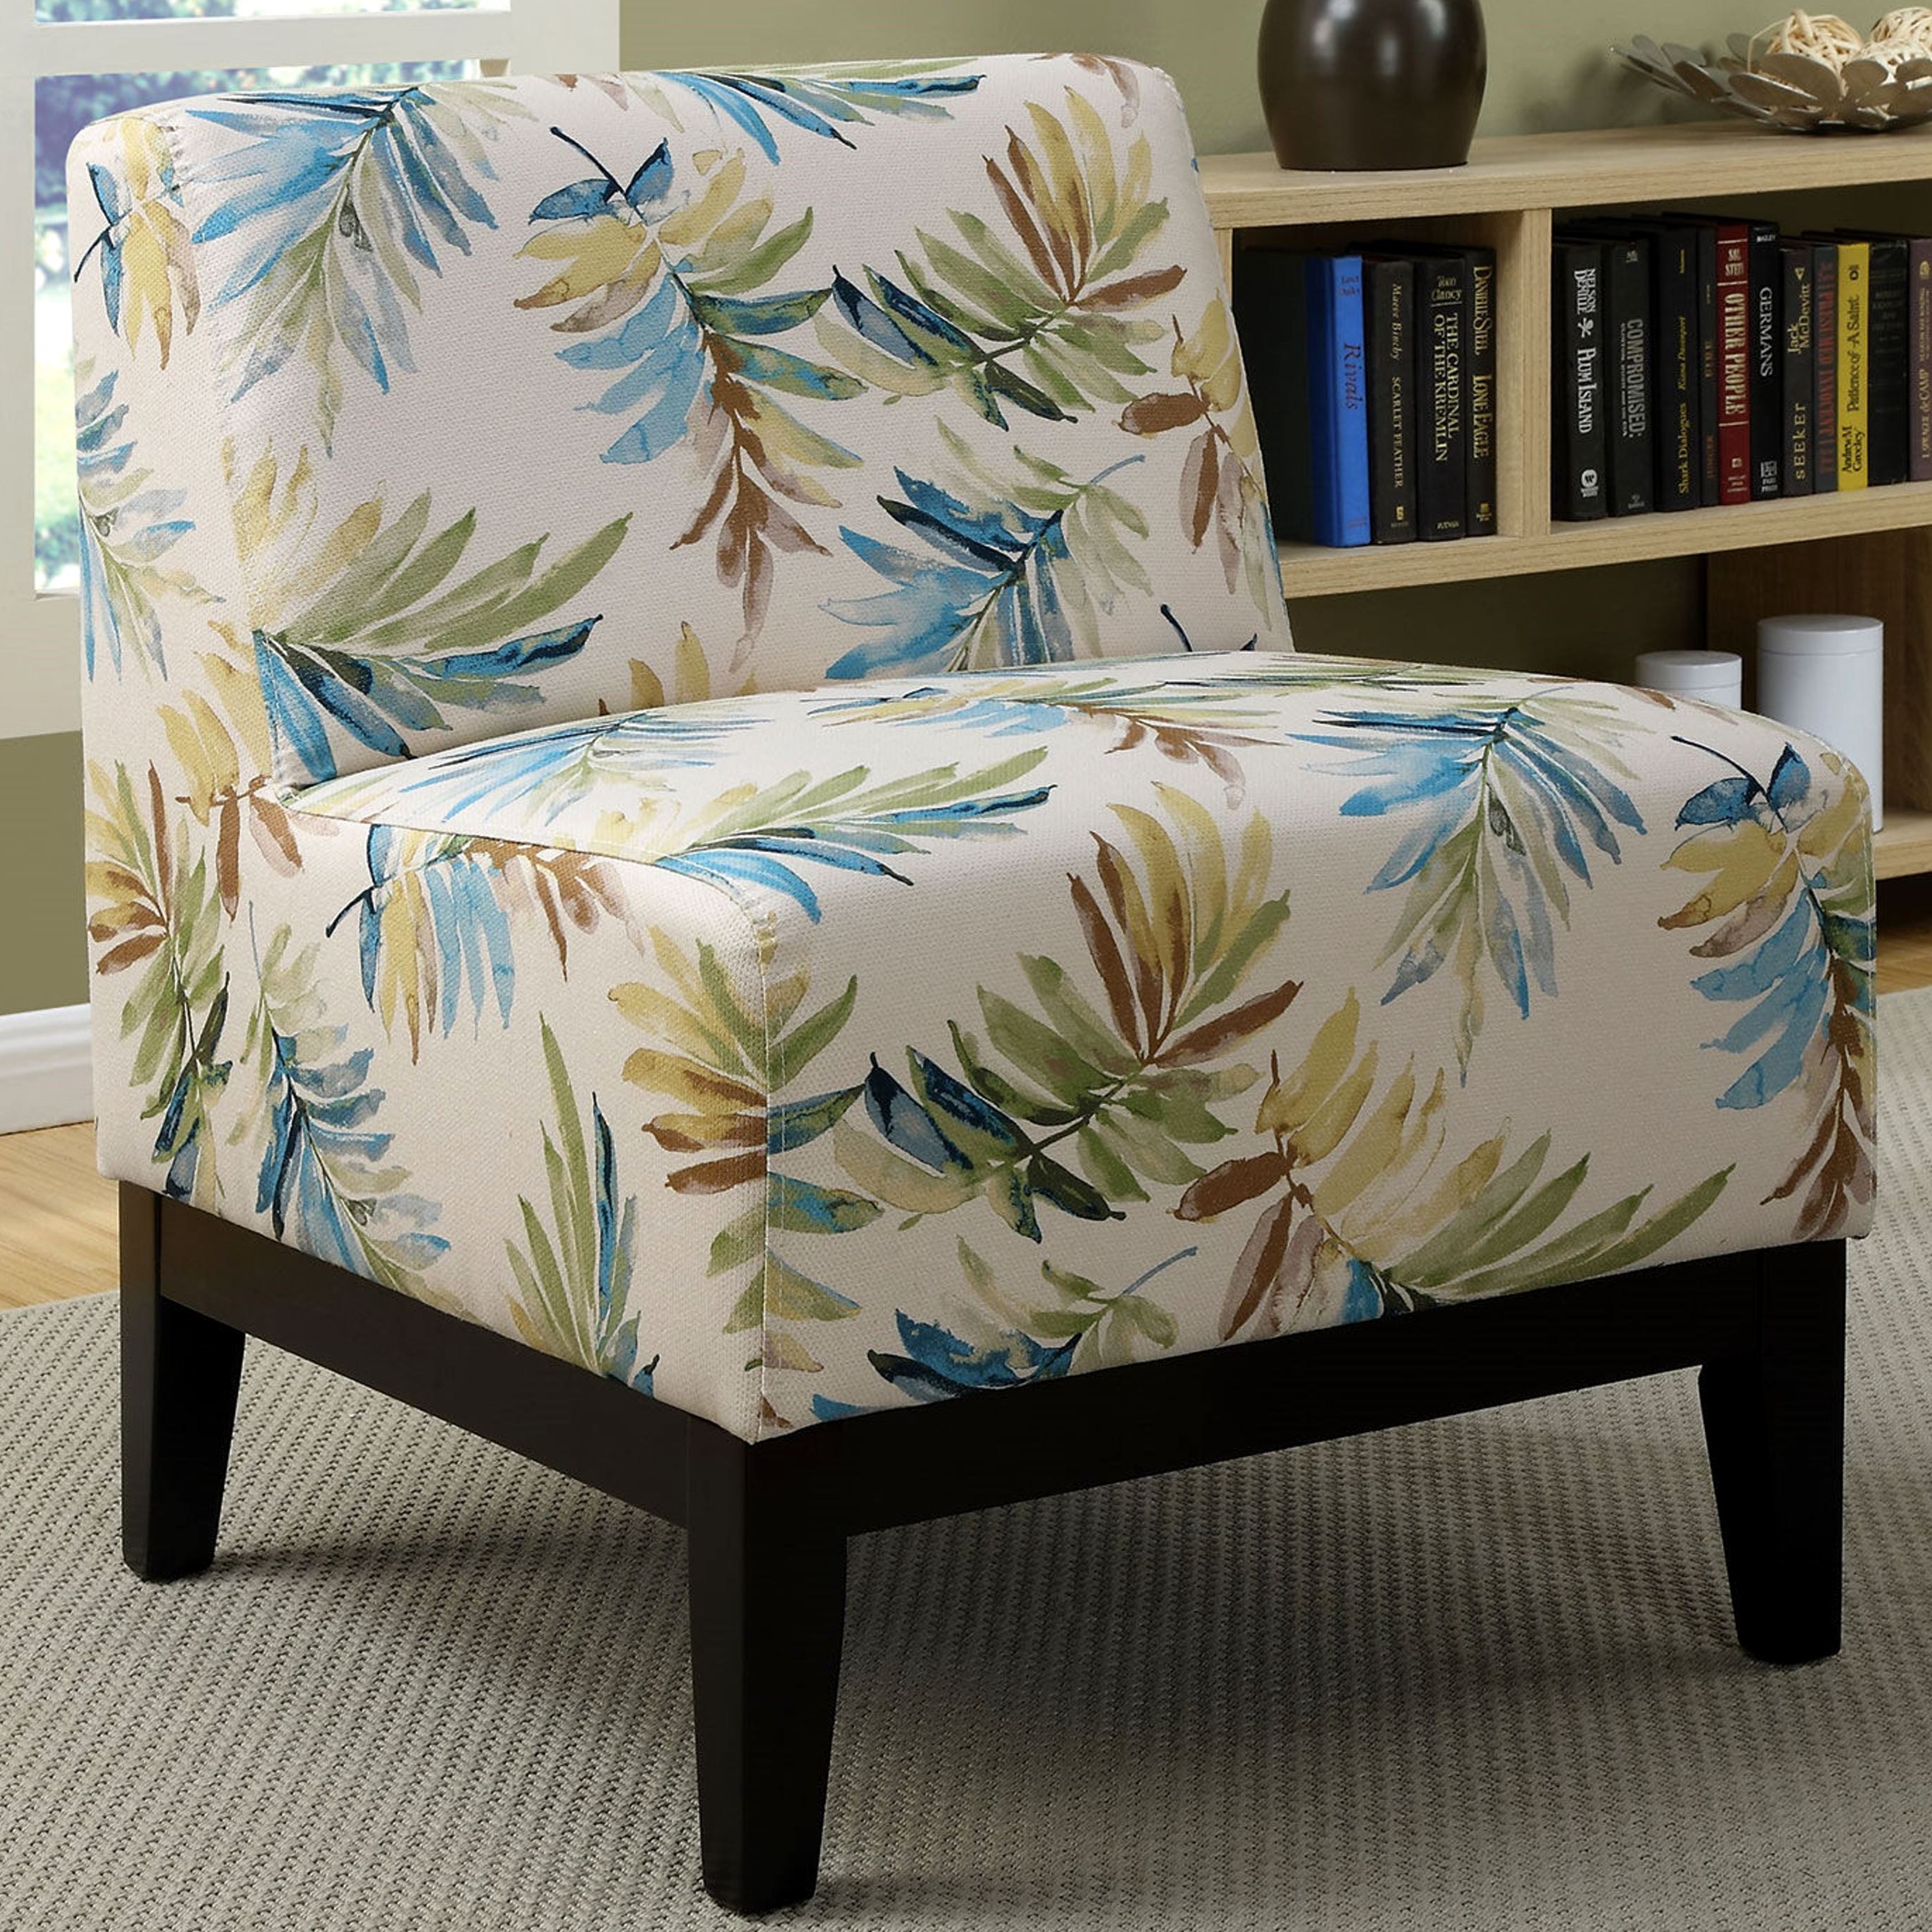 Sycamore Artistic Blue Green Leaf Printed Design Slipper Accent Chair Overstock 10769046